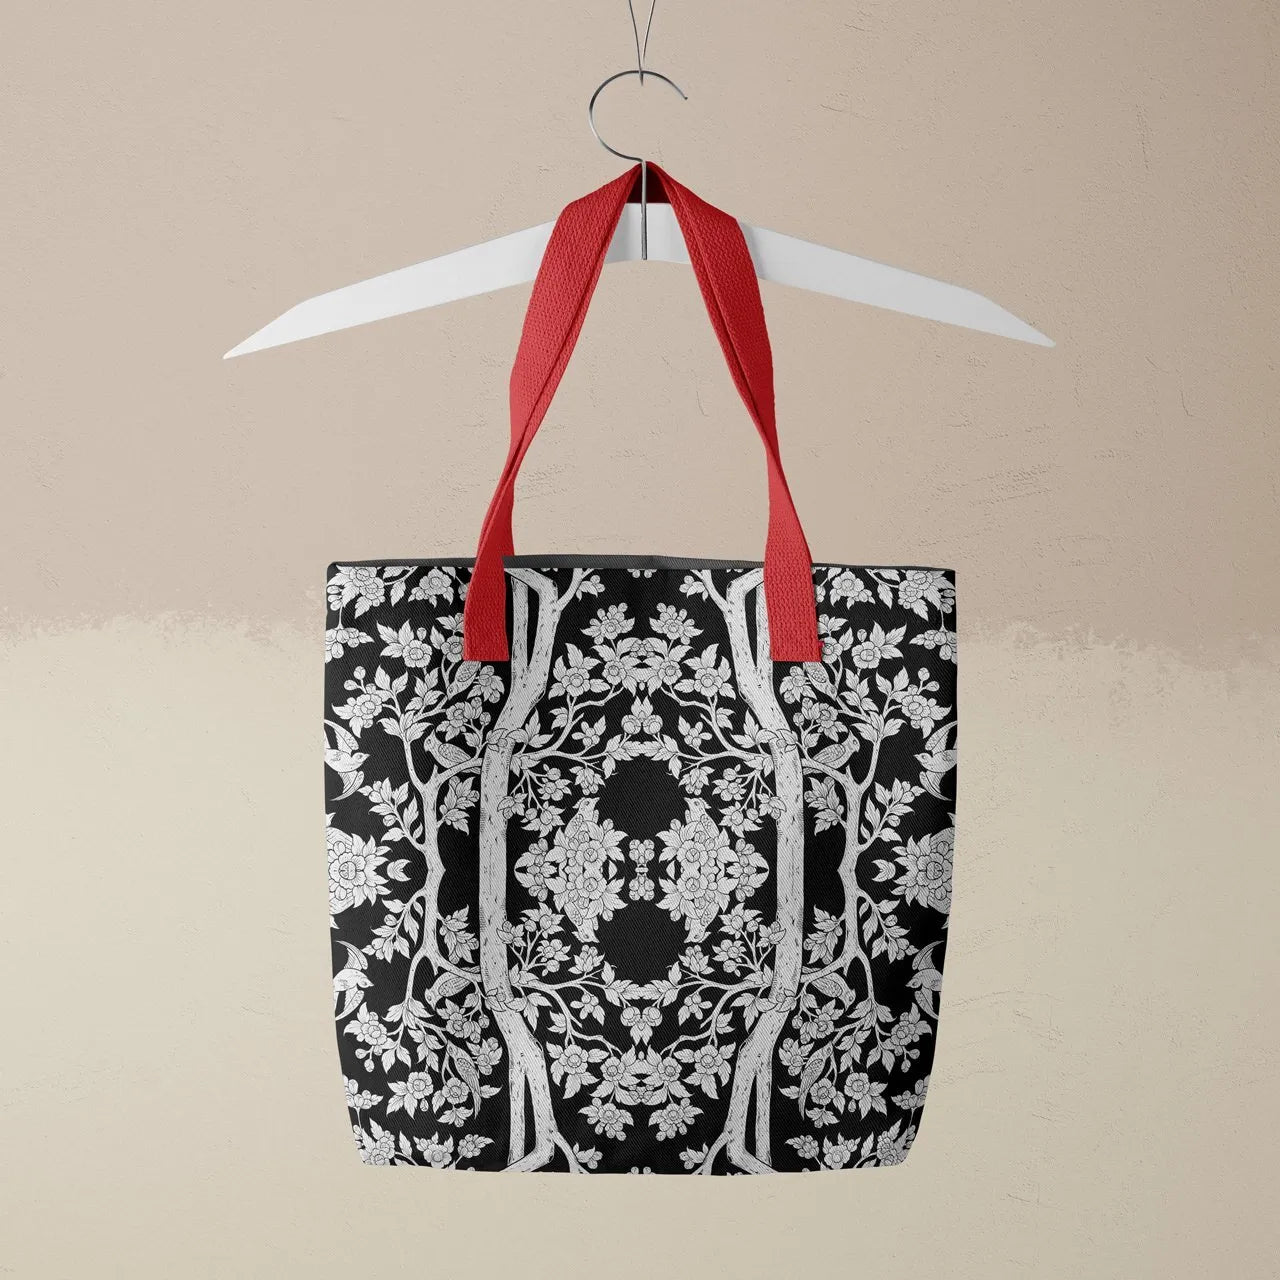 Aviary Tote - Raven - Heavy Duty Reusable Grocery Bag - Red Handles - Shopping Totes - Aesthetic Art